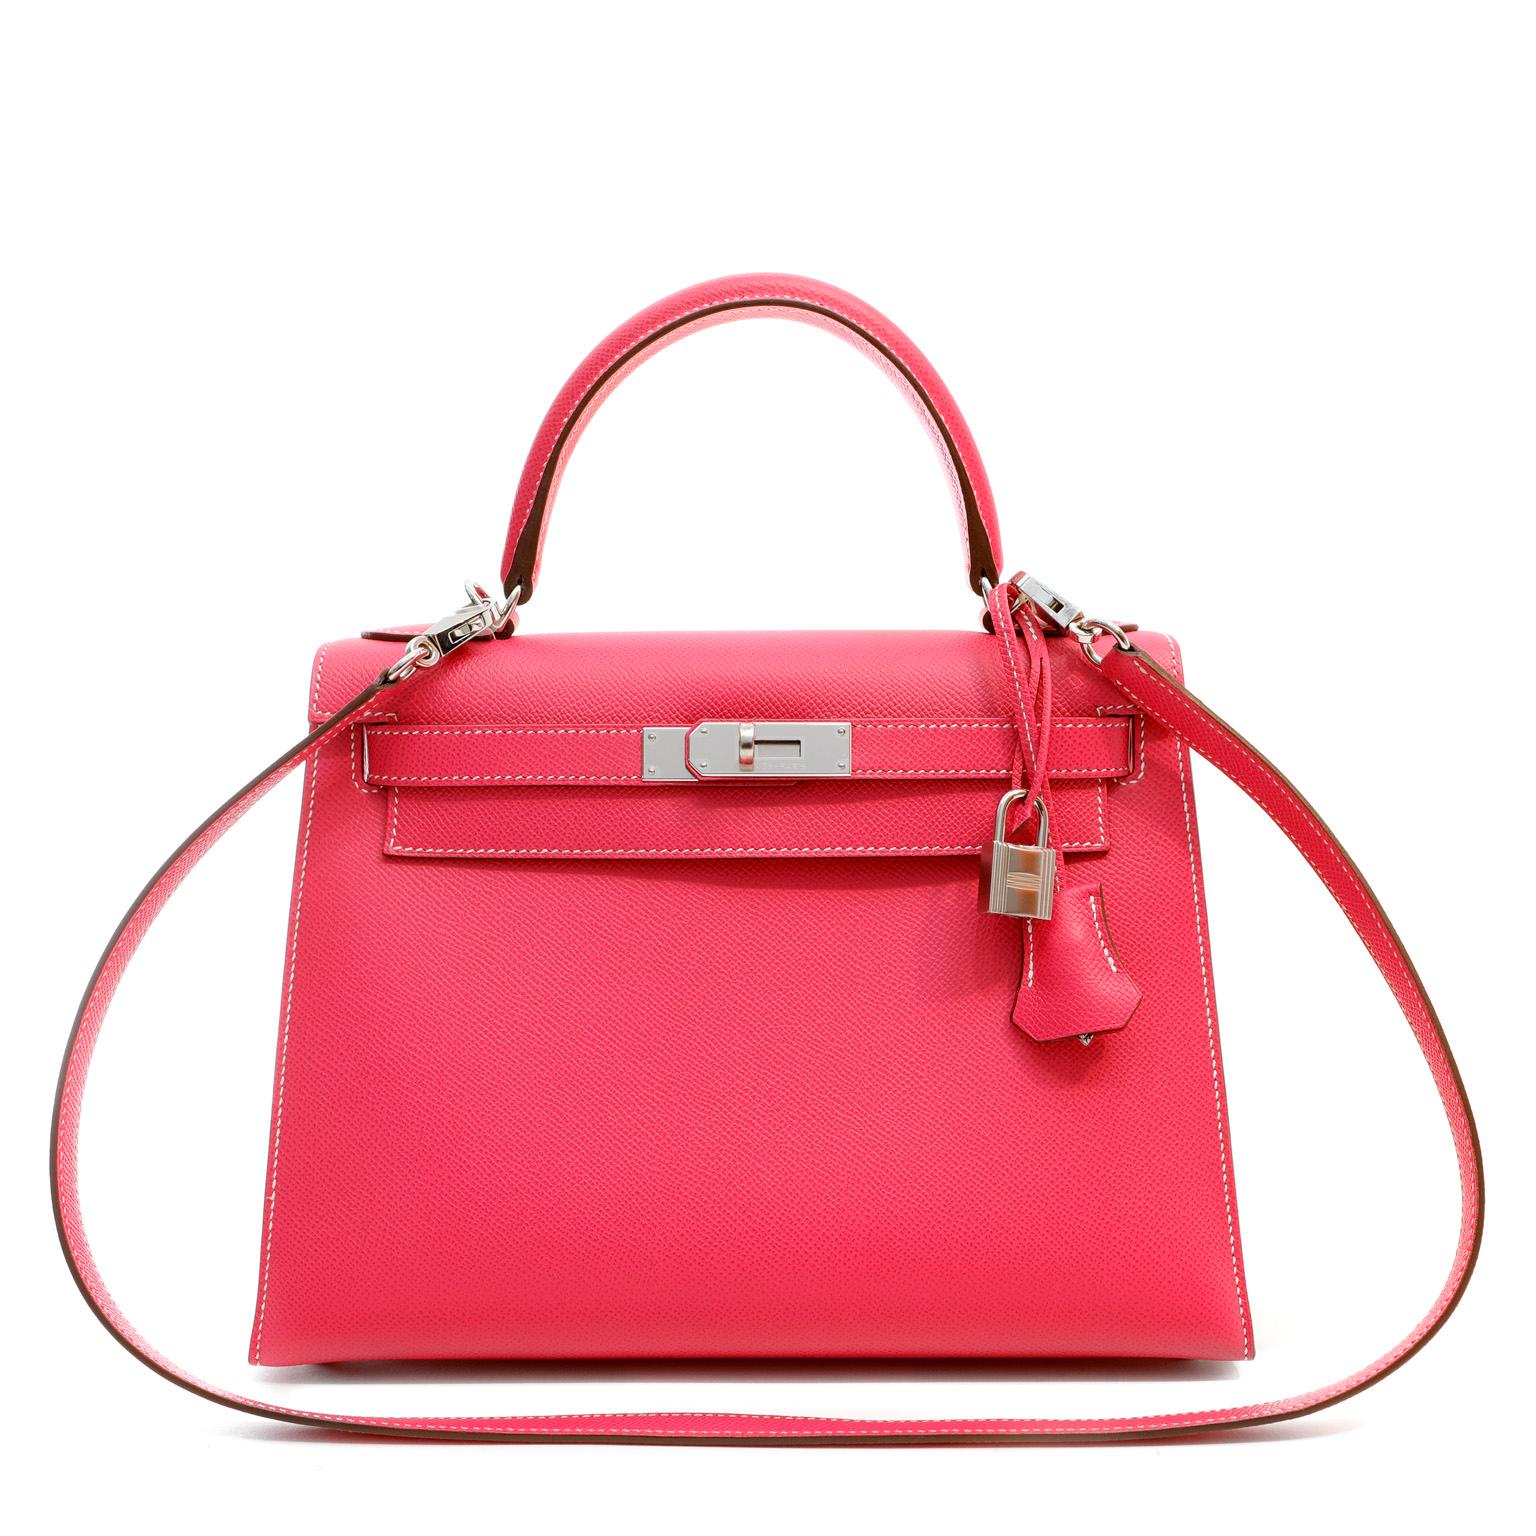 This authentic Hermès Hot Pink Epsom 28 cm Kelly Sellier is in pristine condition with the protective plastic intact on the hardware.  A special edition from the Candy Collection, it is a highly collectible Kelly.  Hermès bags are considered the